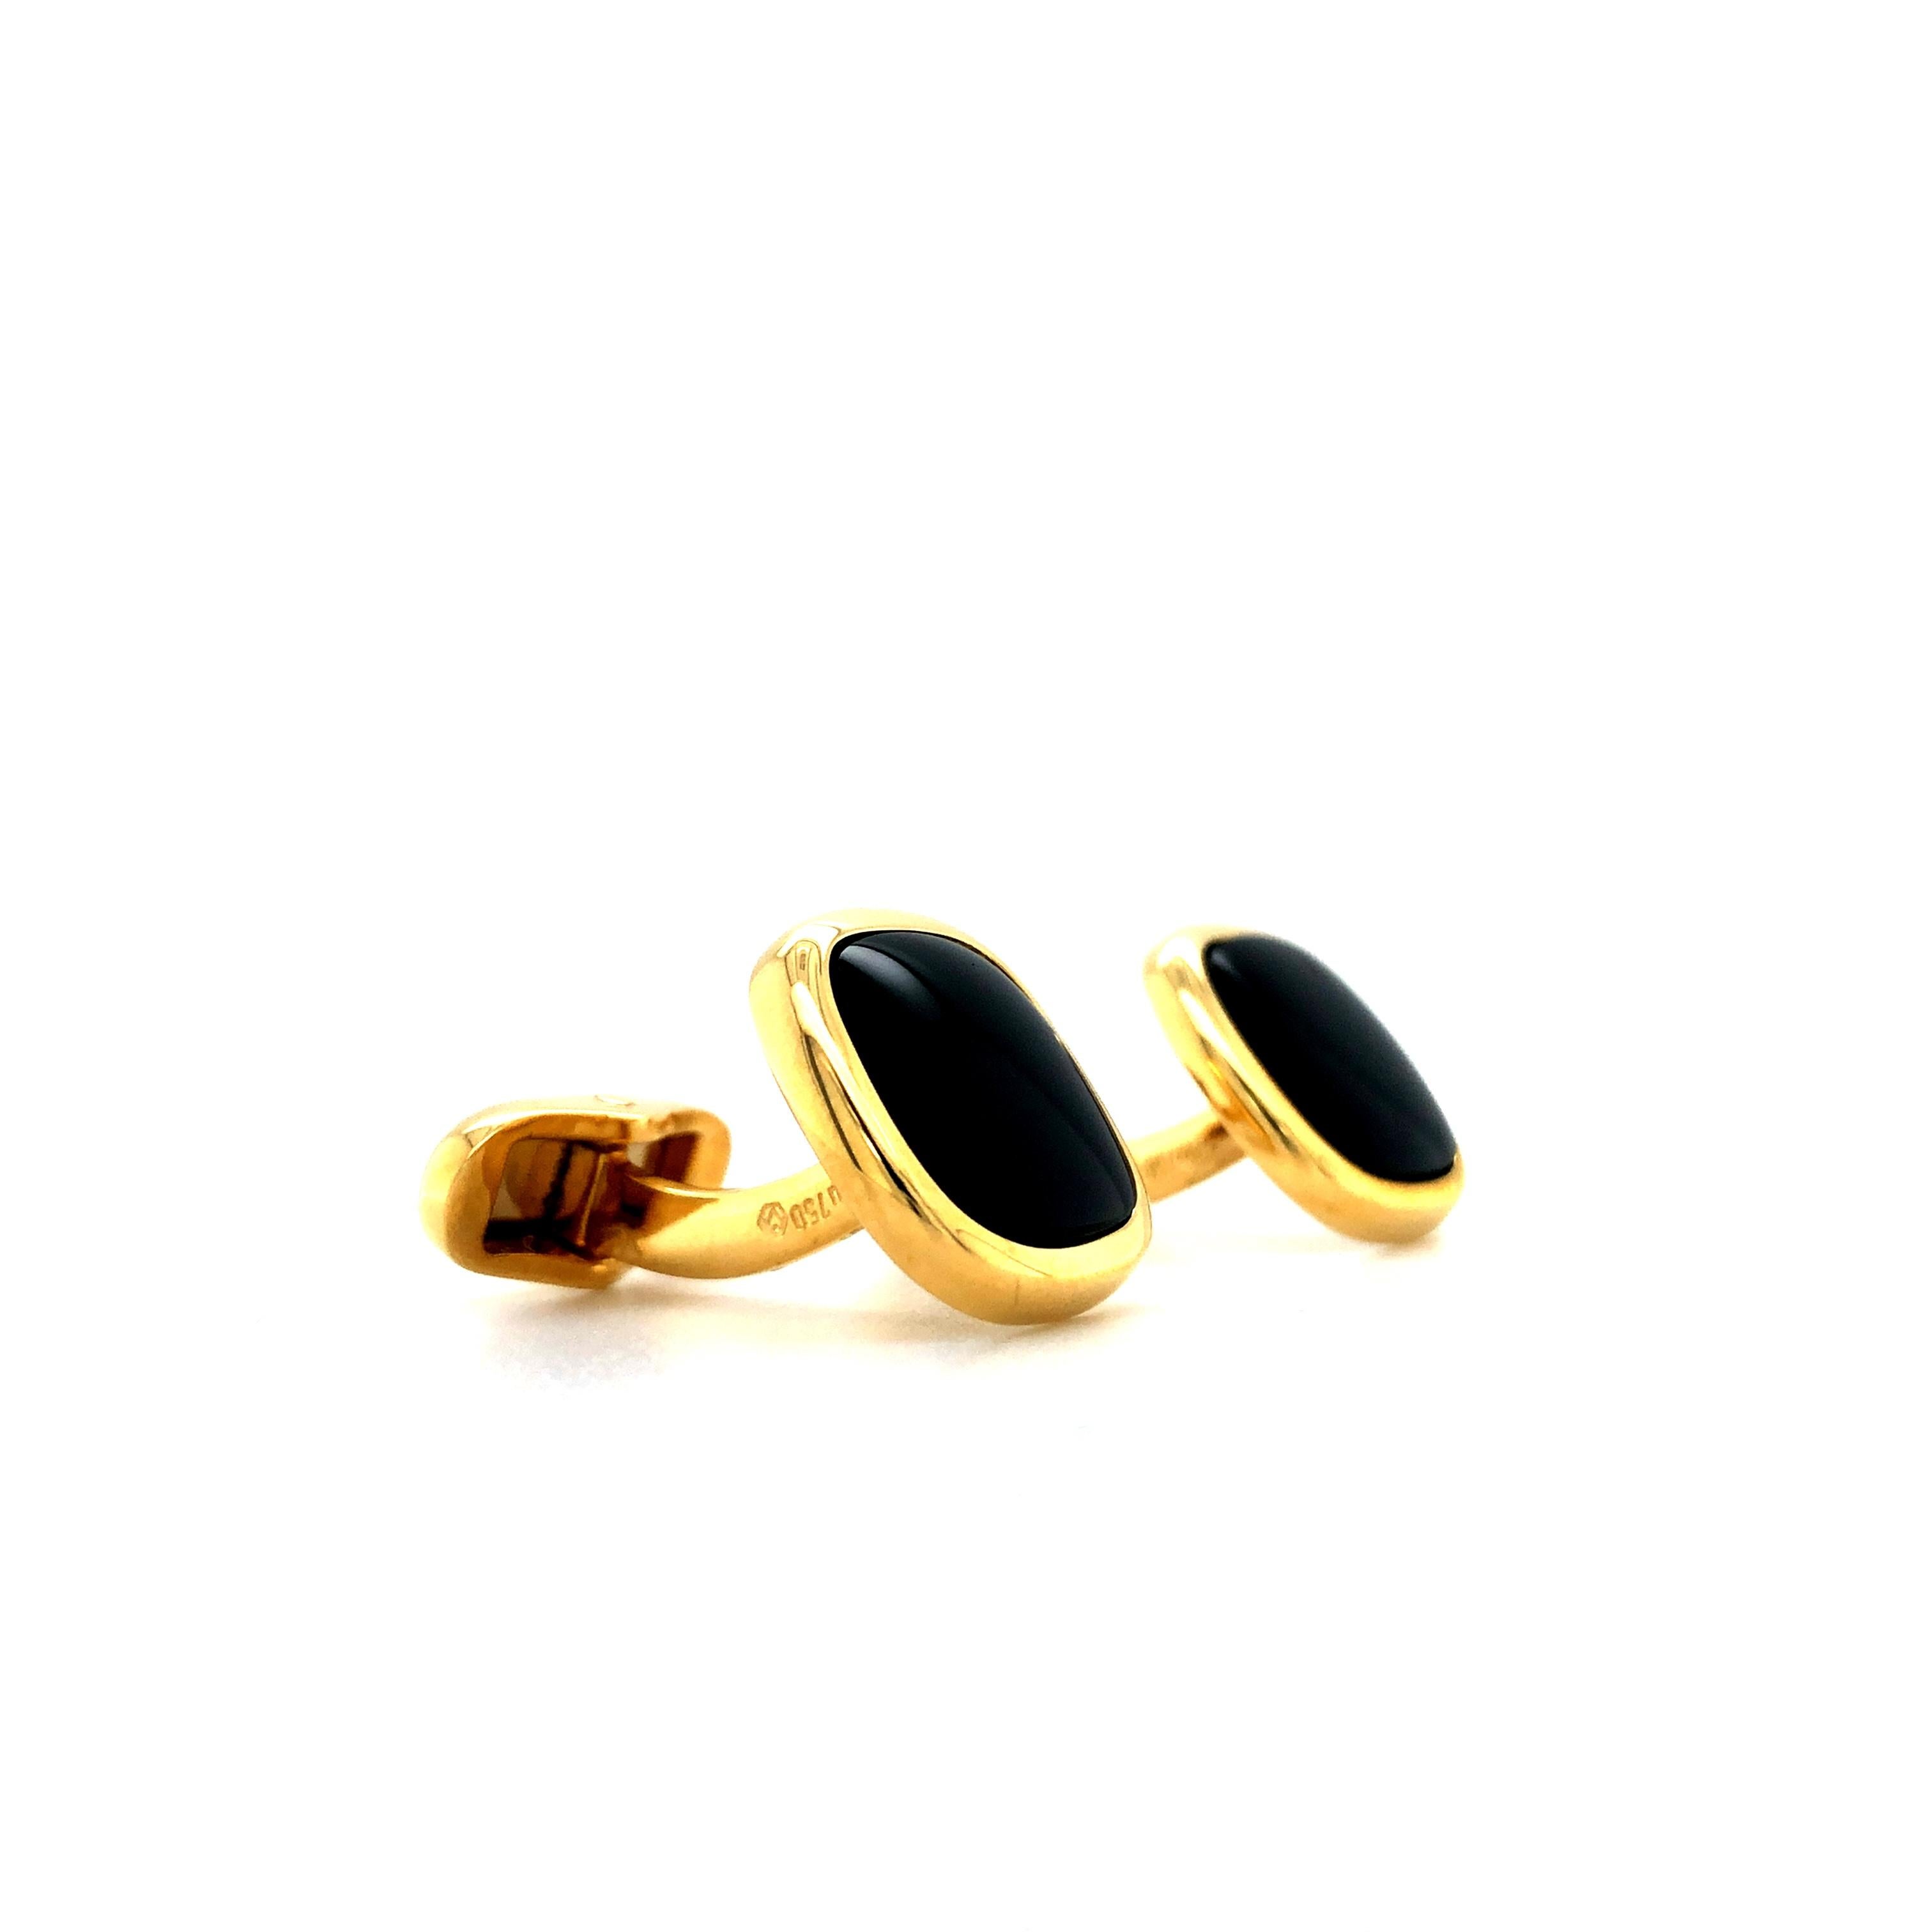 Square Cufflinks Rounded Contours, 18k Yellow Gold In New Condition For Sale In Pforzheim, DE